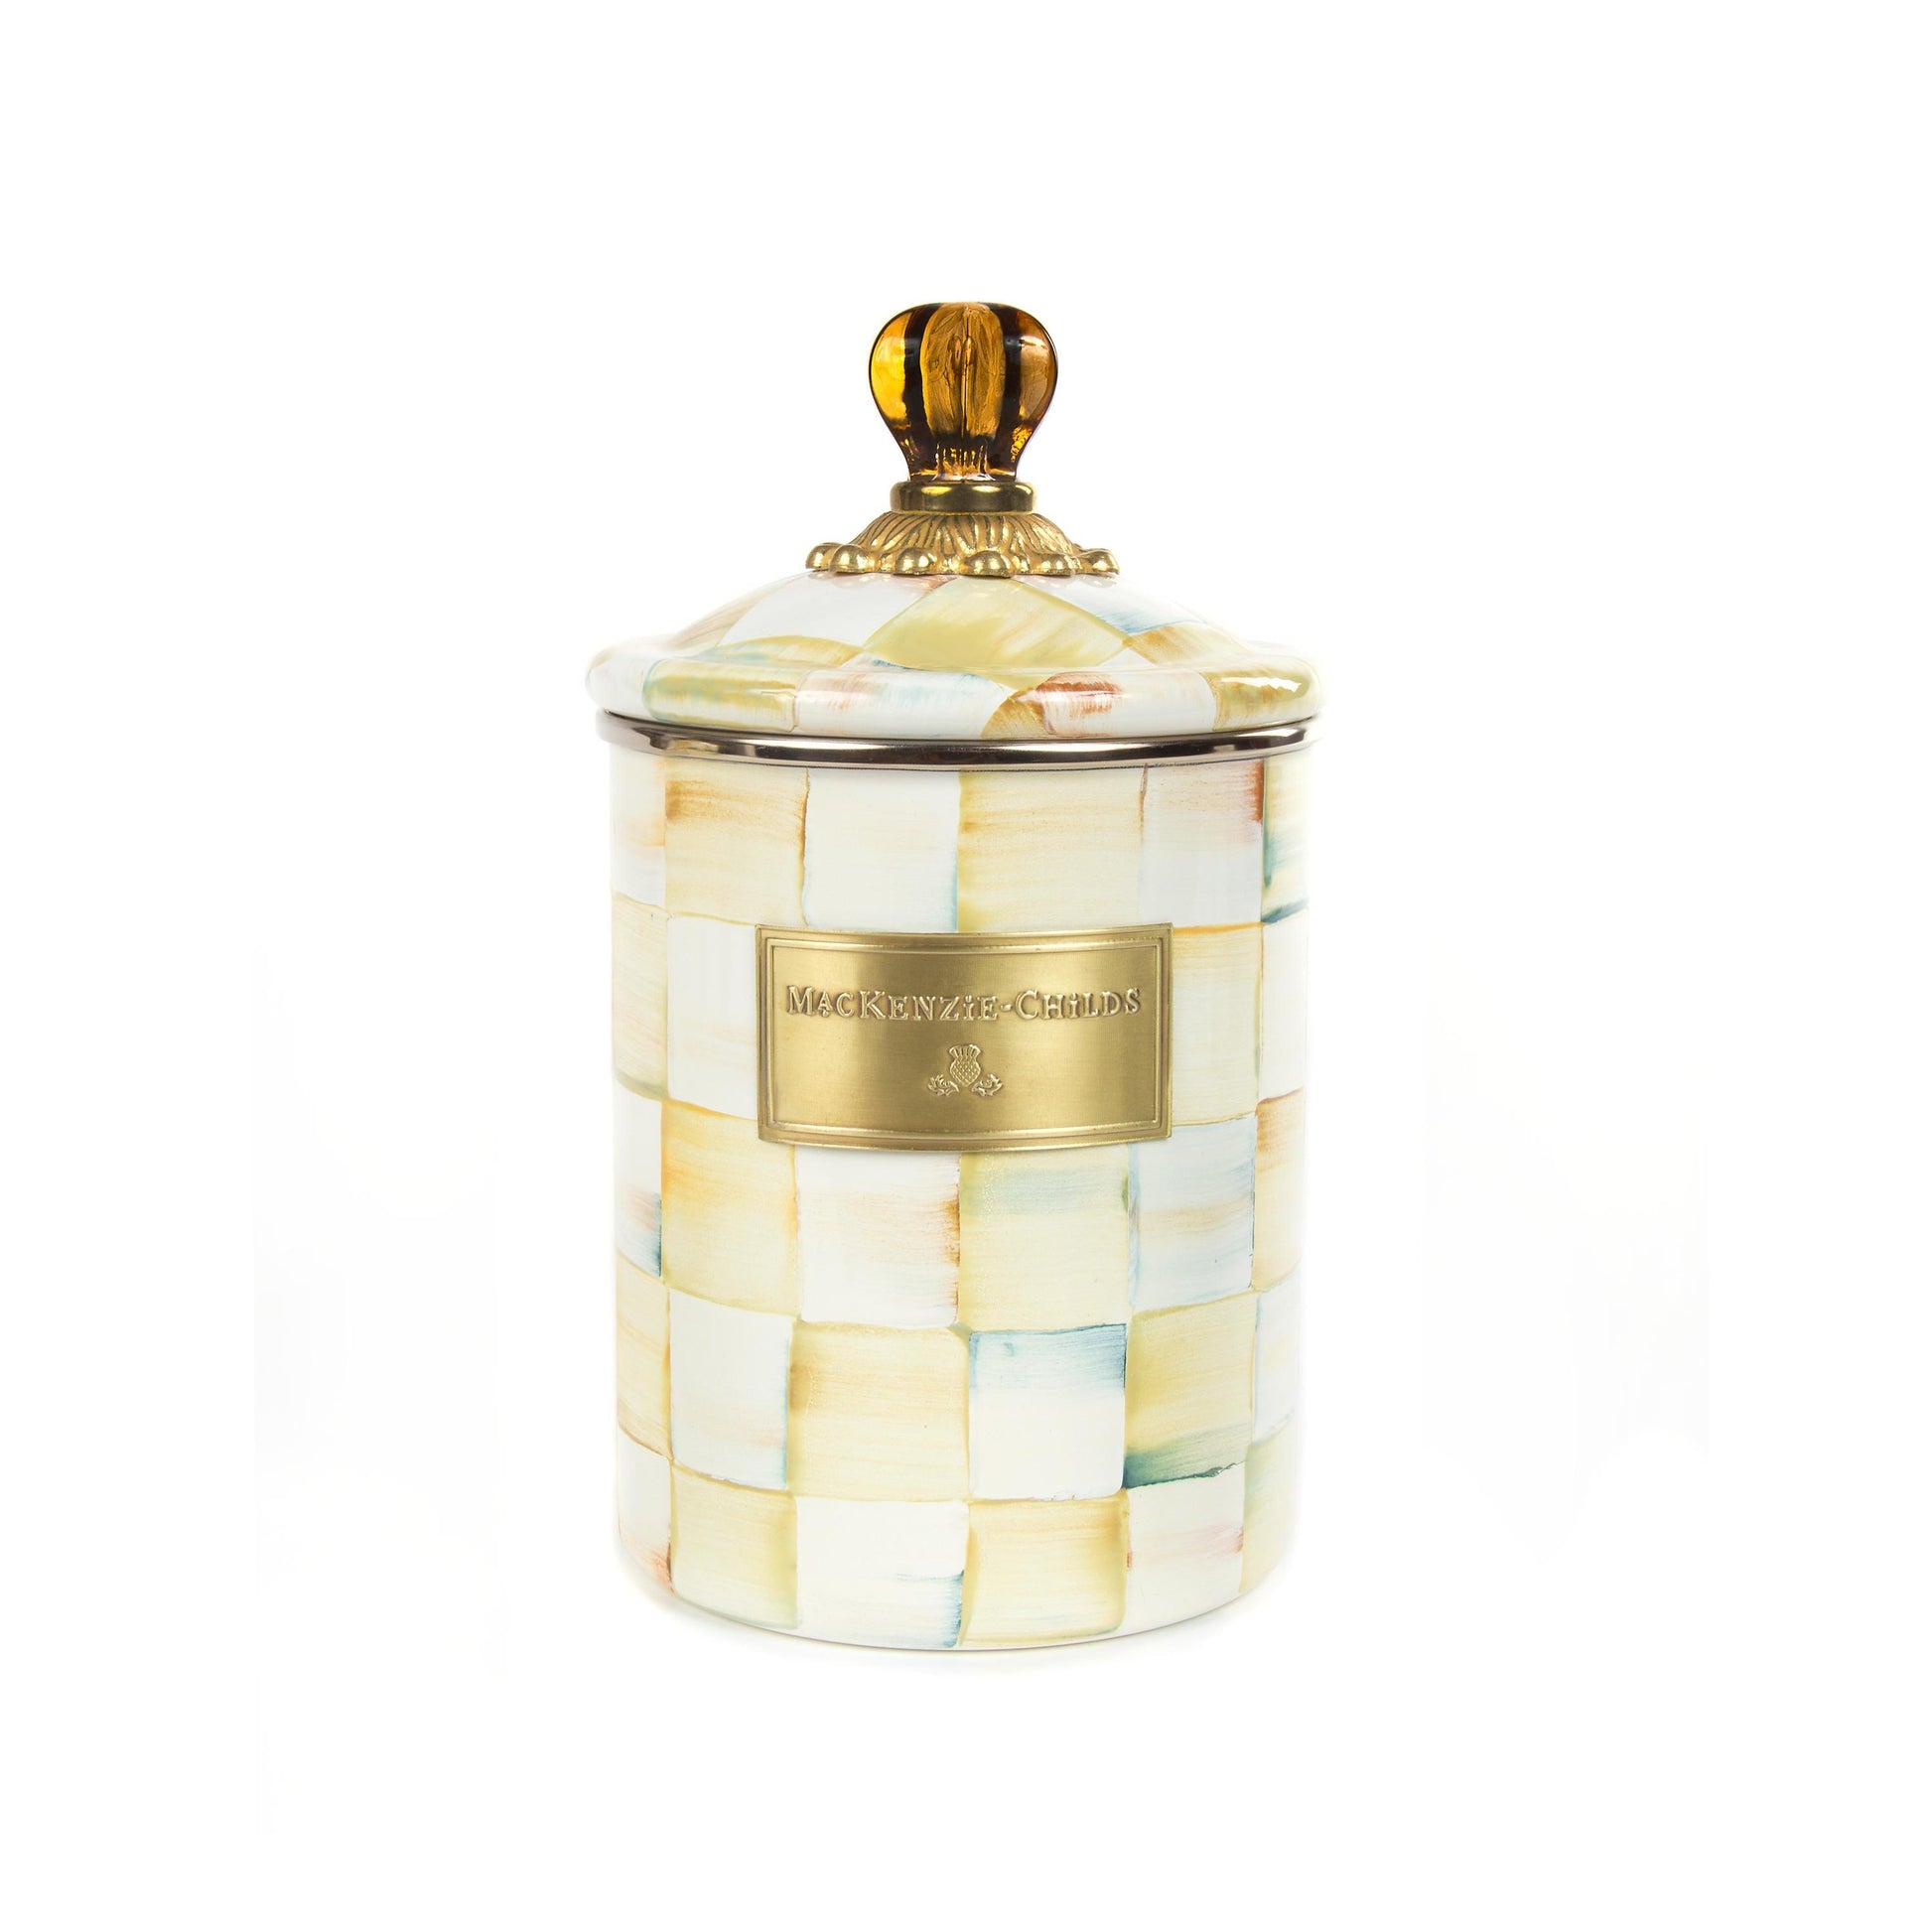 Parchment Check Enamel Canister - Medium (Mackenzie Childs) - Gallery Gifts Online 